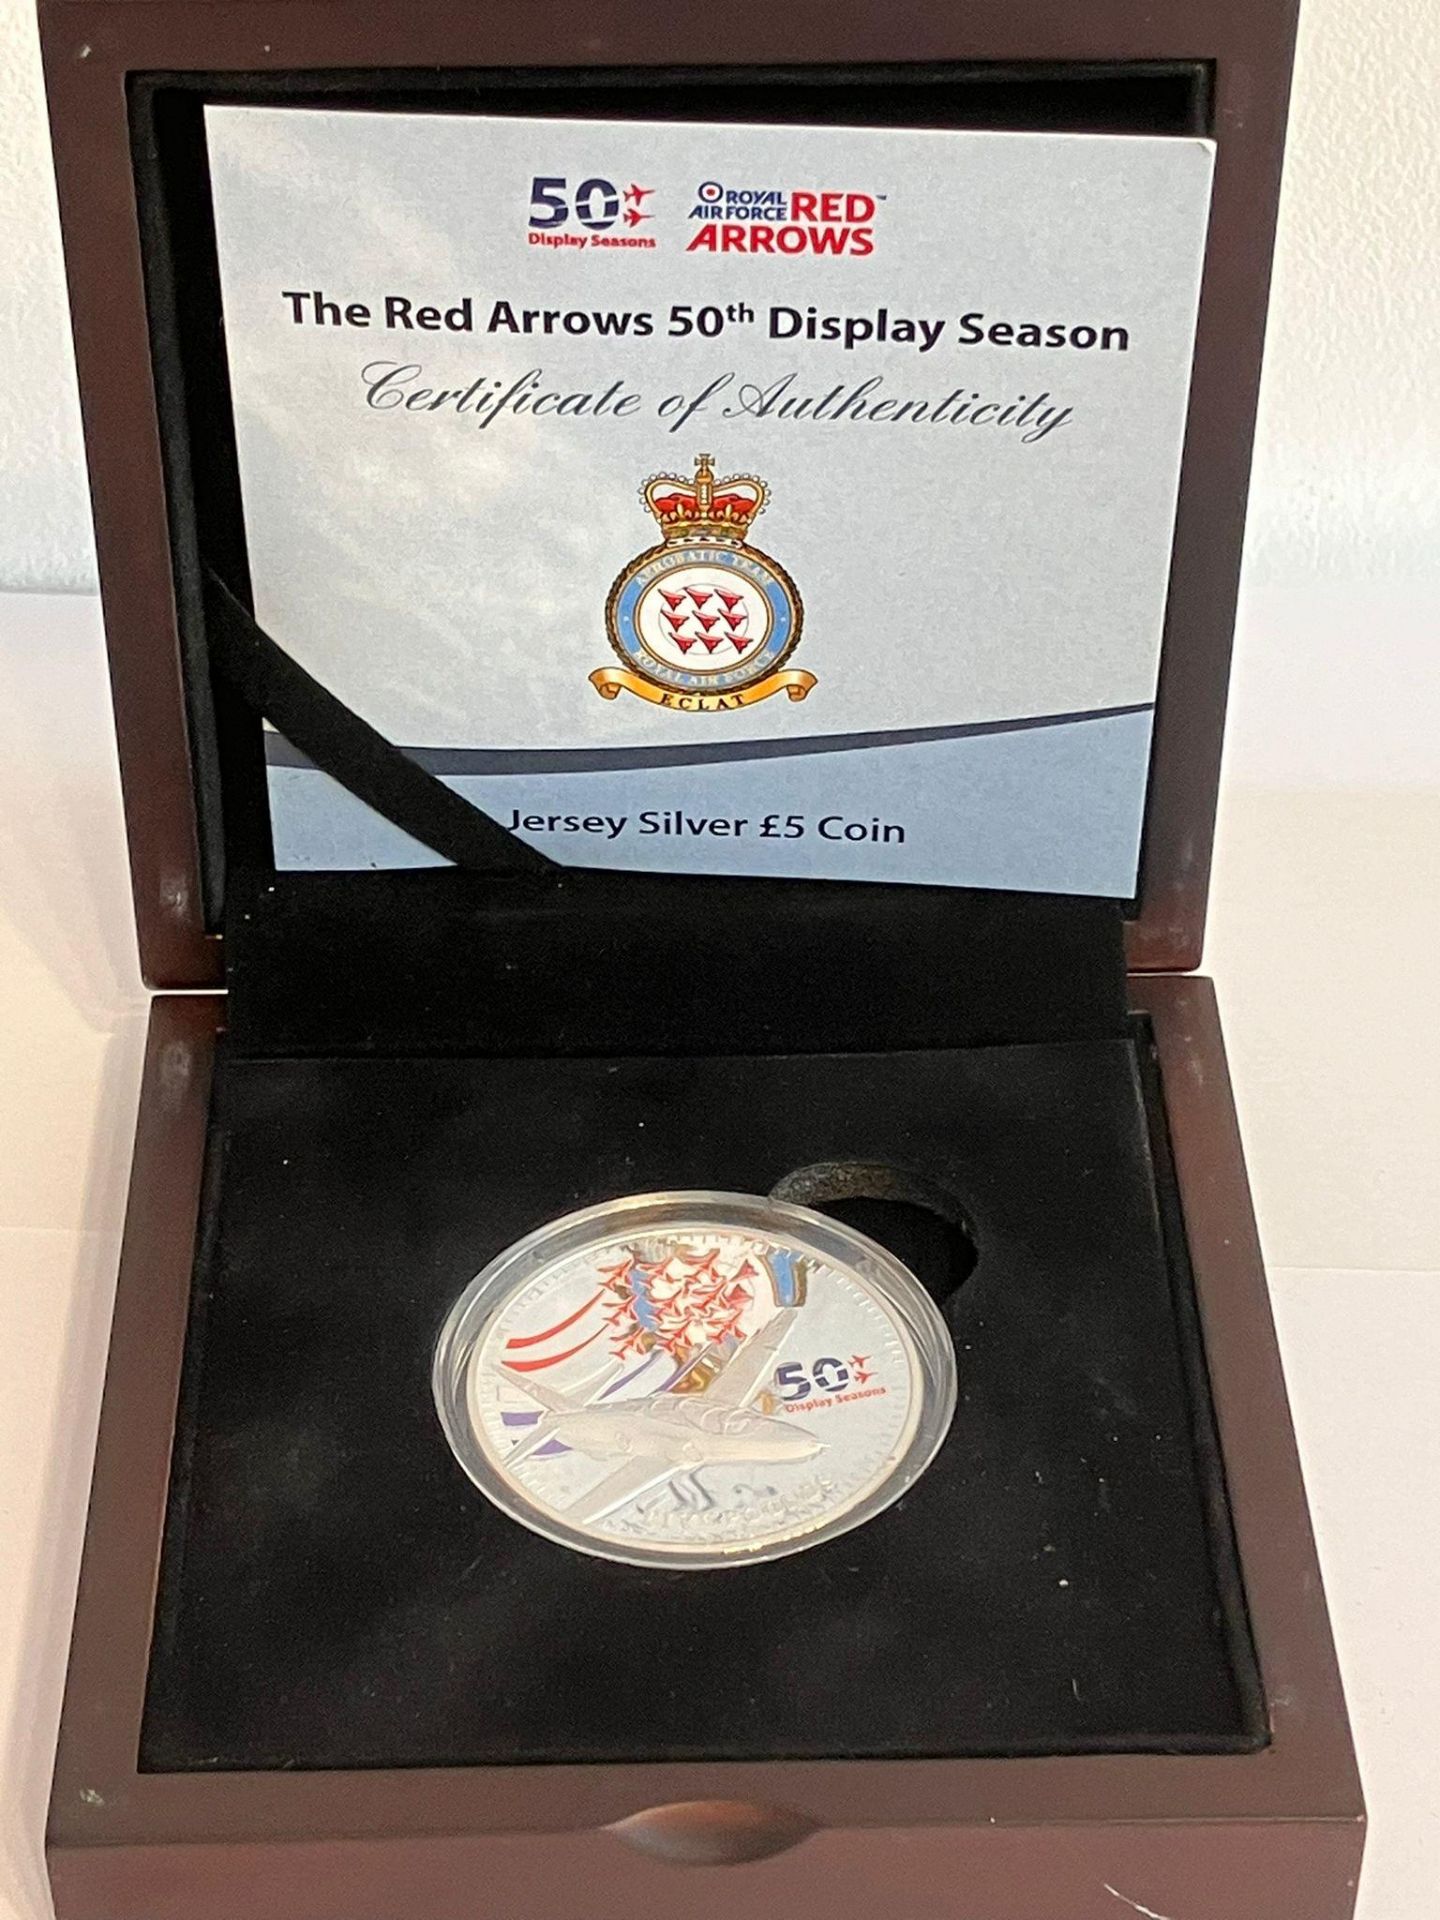 SILVER PROOF FIVE POUND COIN Minted in 2014 to celebrate 50 years of the RAF RED ARROWS TEAM. - Image 3 of 5